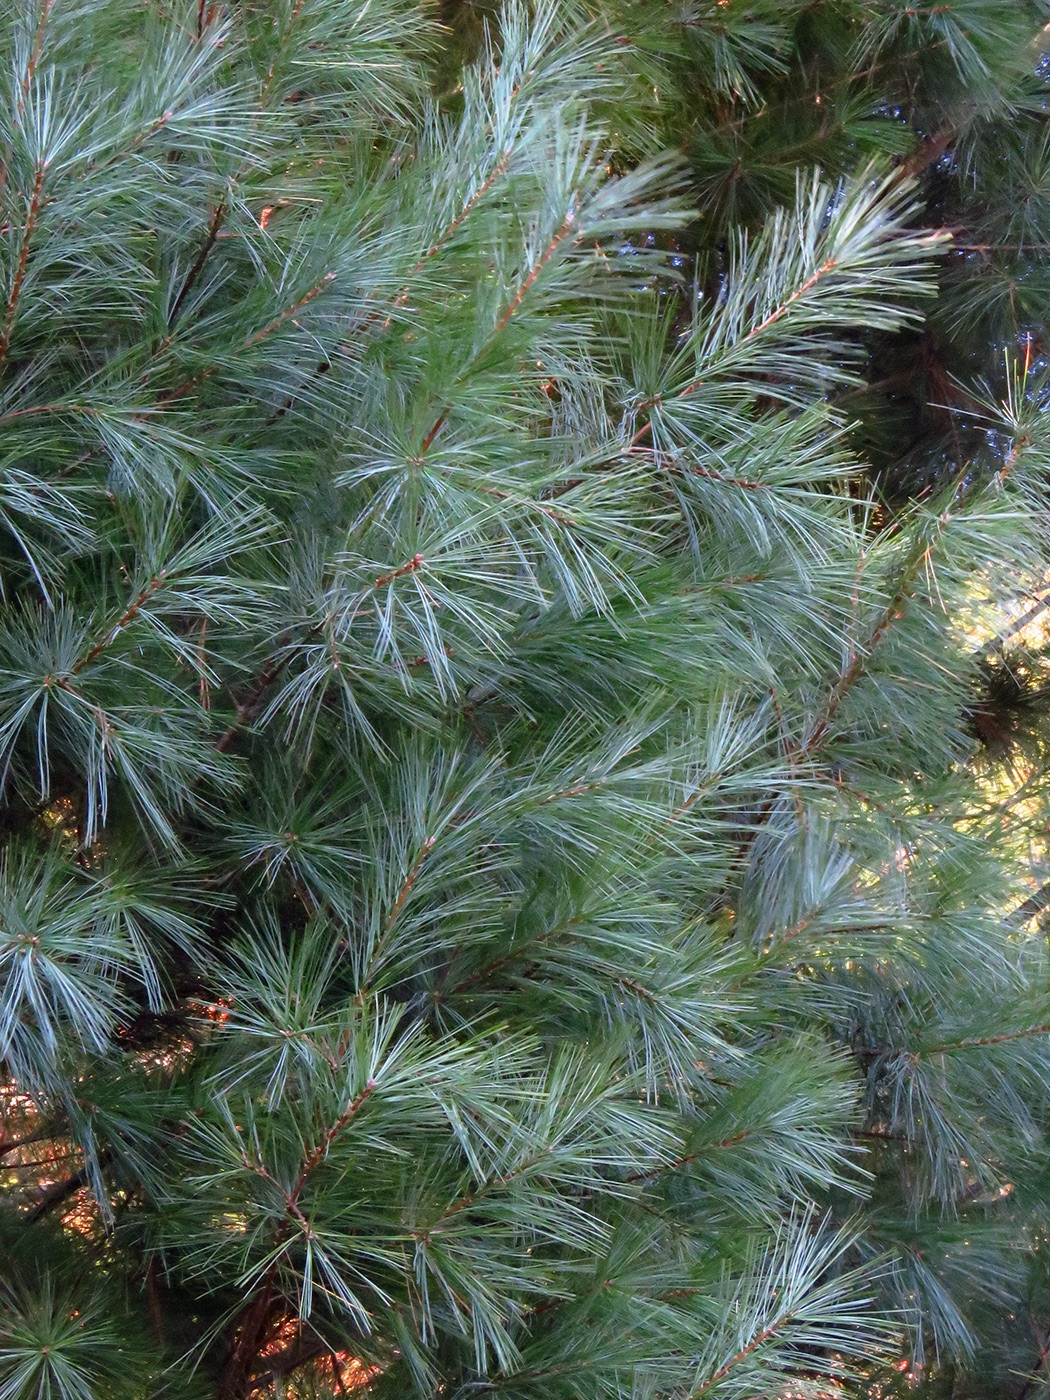 The Scientific Name is Pinus strobus. You will likely hear them called Eastern White Pine, Northern White Pine, Weymouth Pine, and Soft Pine. This picture shows the Soft, flexible, blue-green needles in fascicles of 5. of Pinus strobus